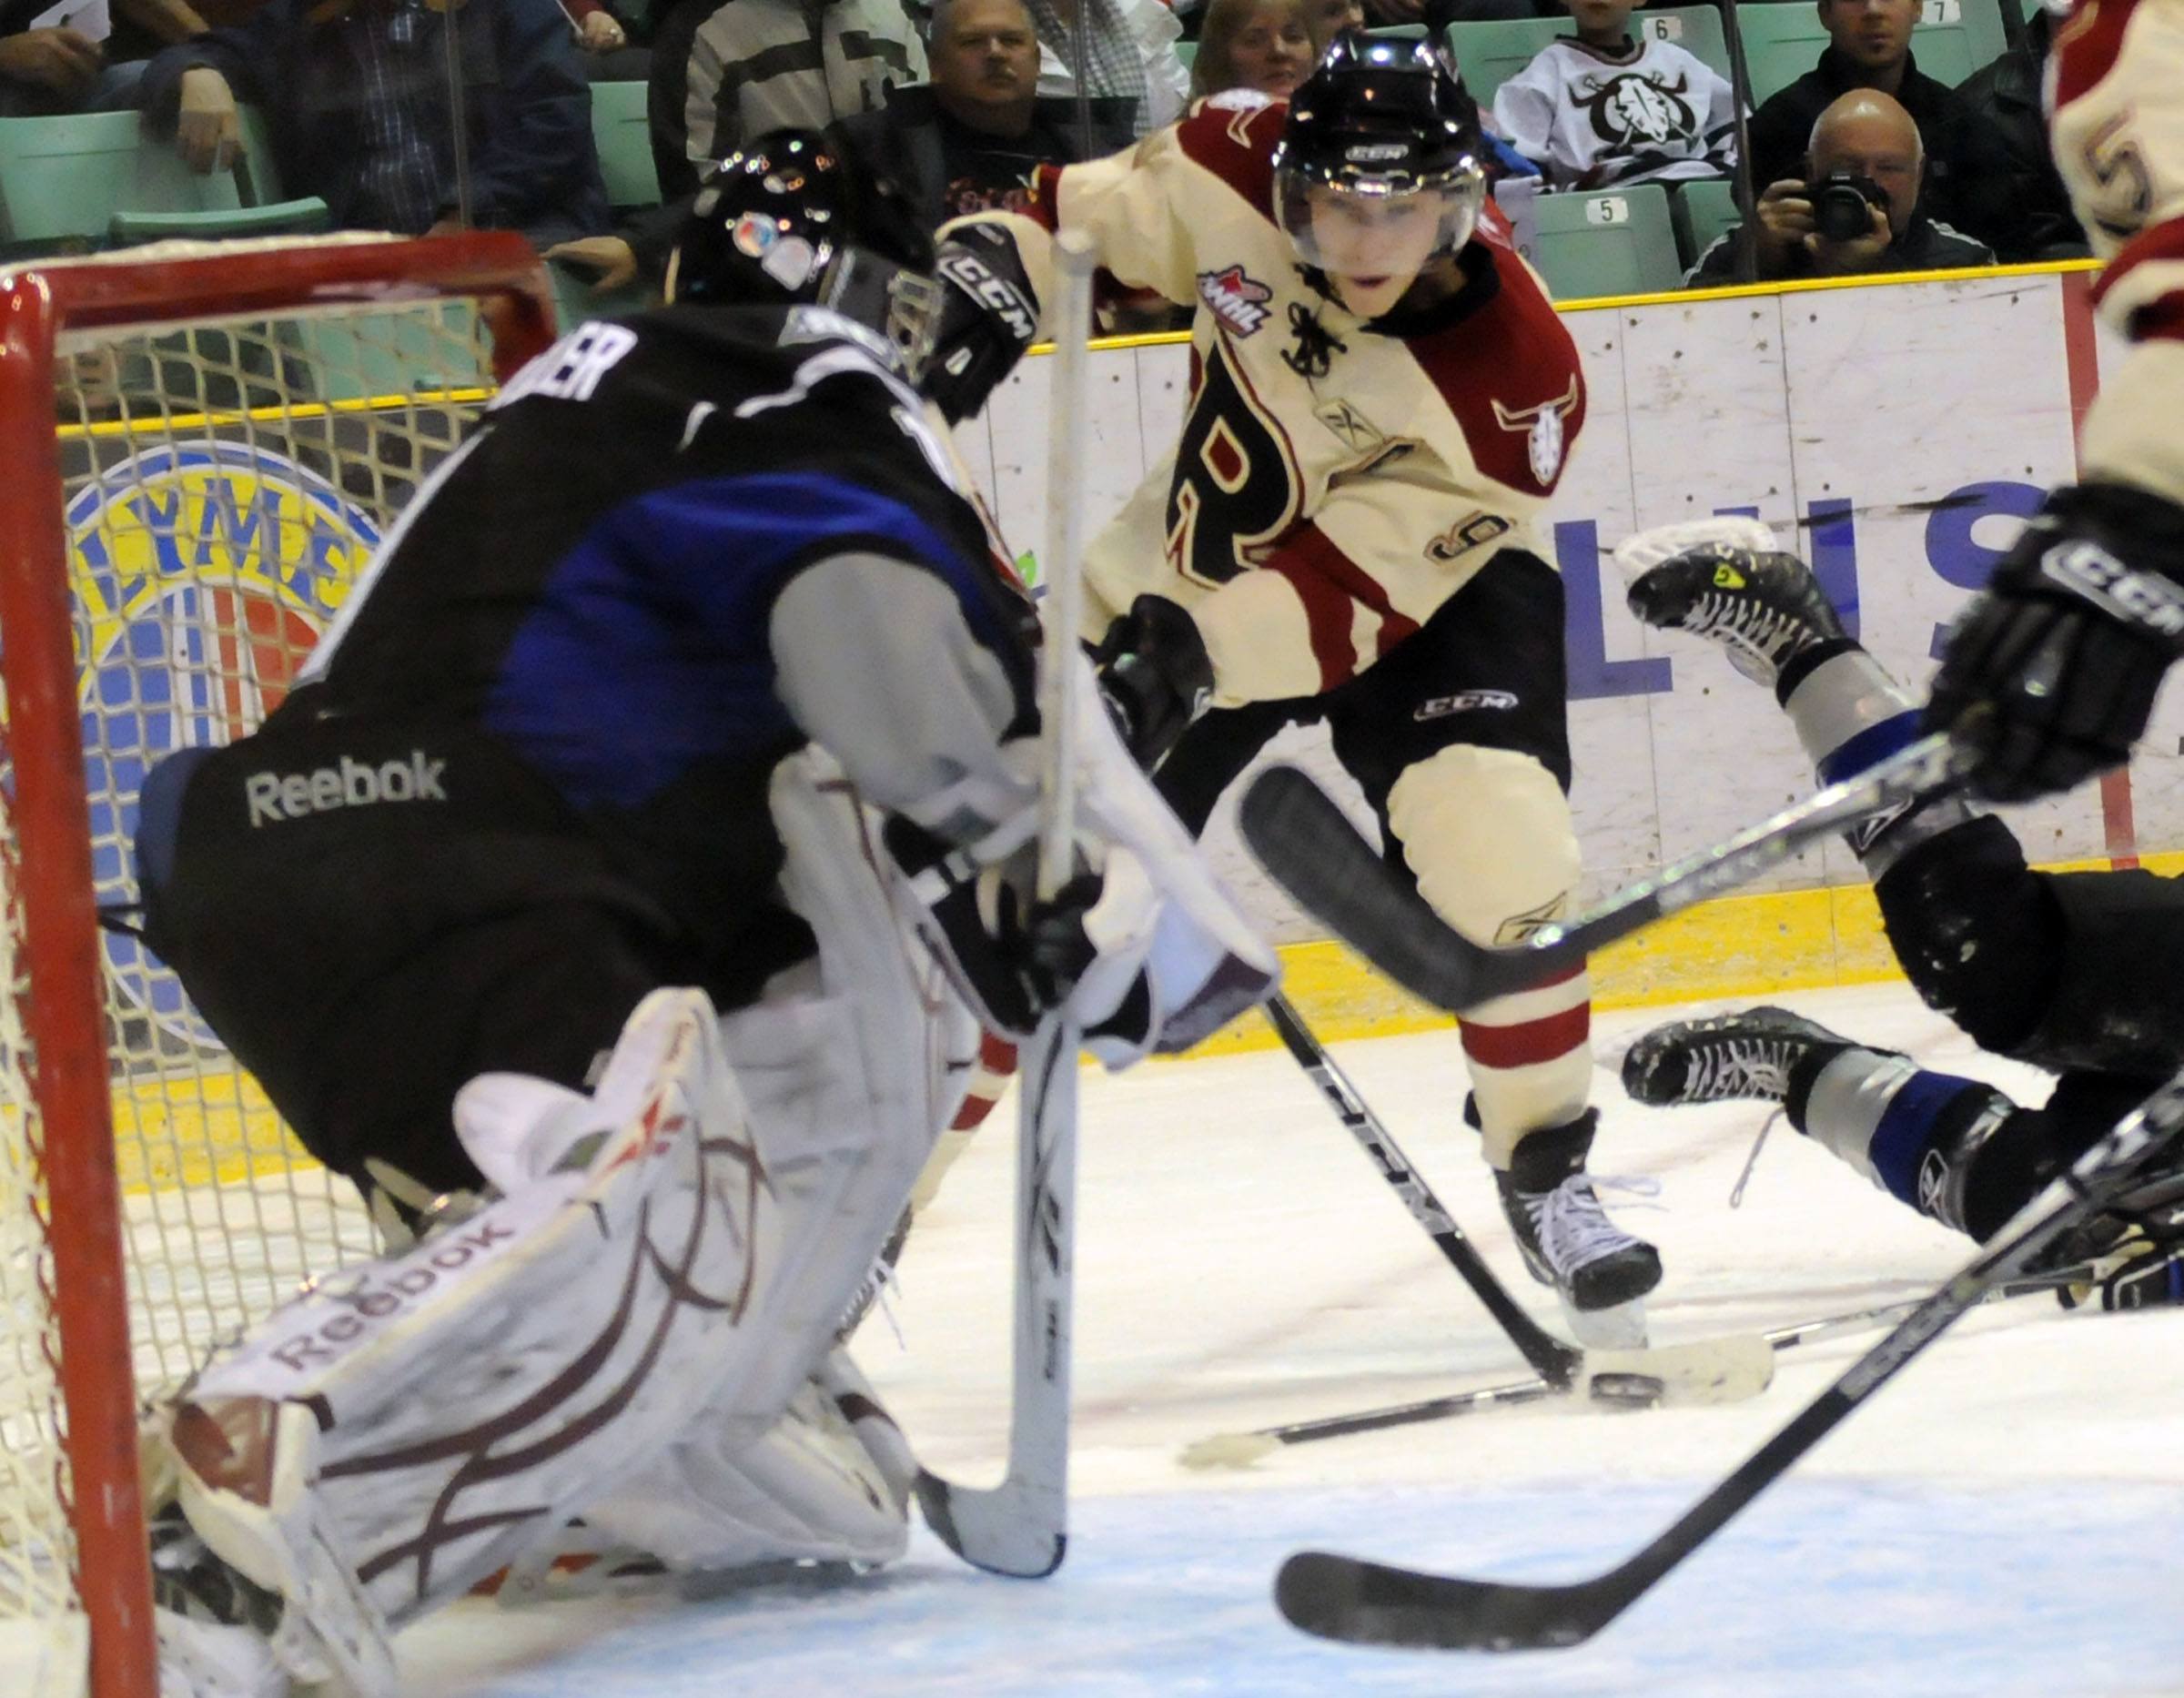 SCORE- The Red Deer Rebels out shot the Swift Current Broncos with a 4-2 win Friday night at the Enmax Centrium. The Rebels scored all four goals in the first period with a total of 35 shots on net.